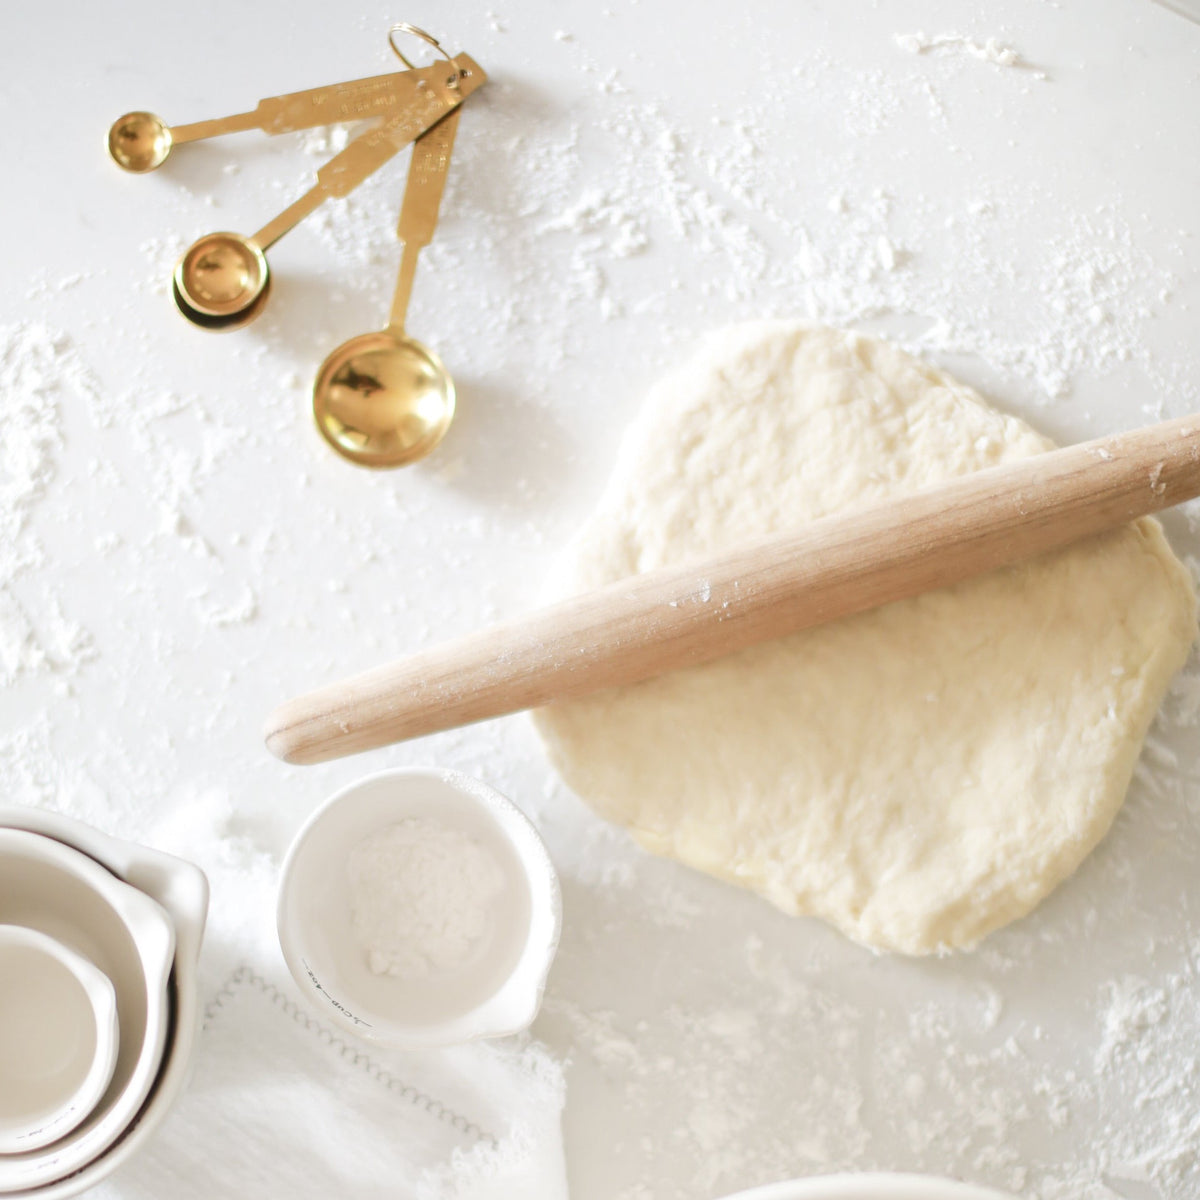 French rolling pin